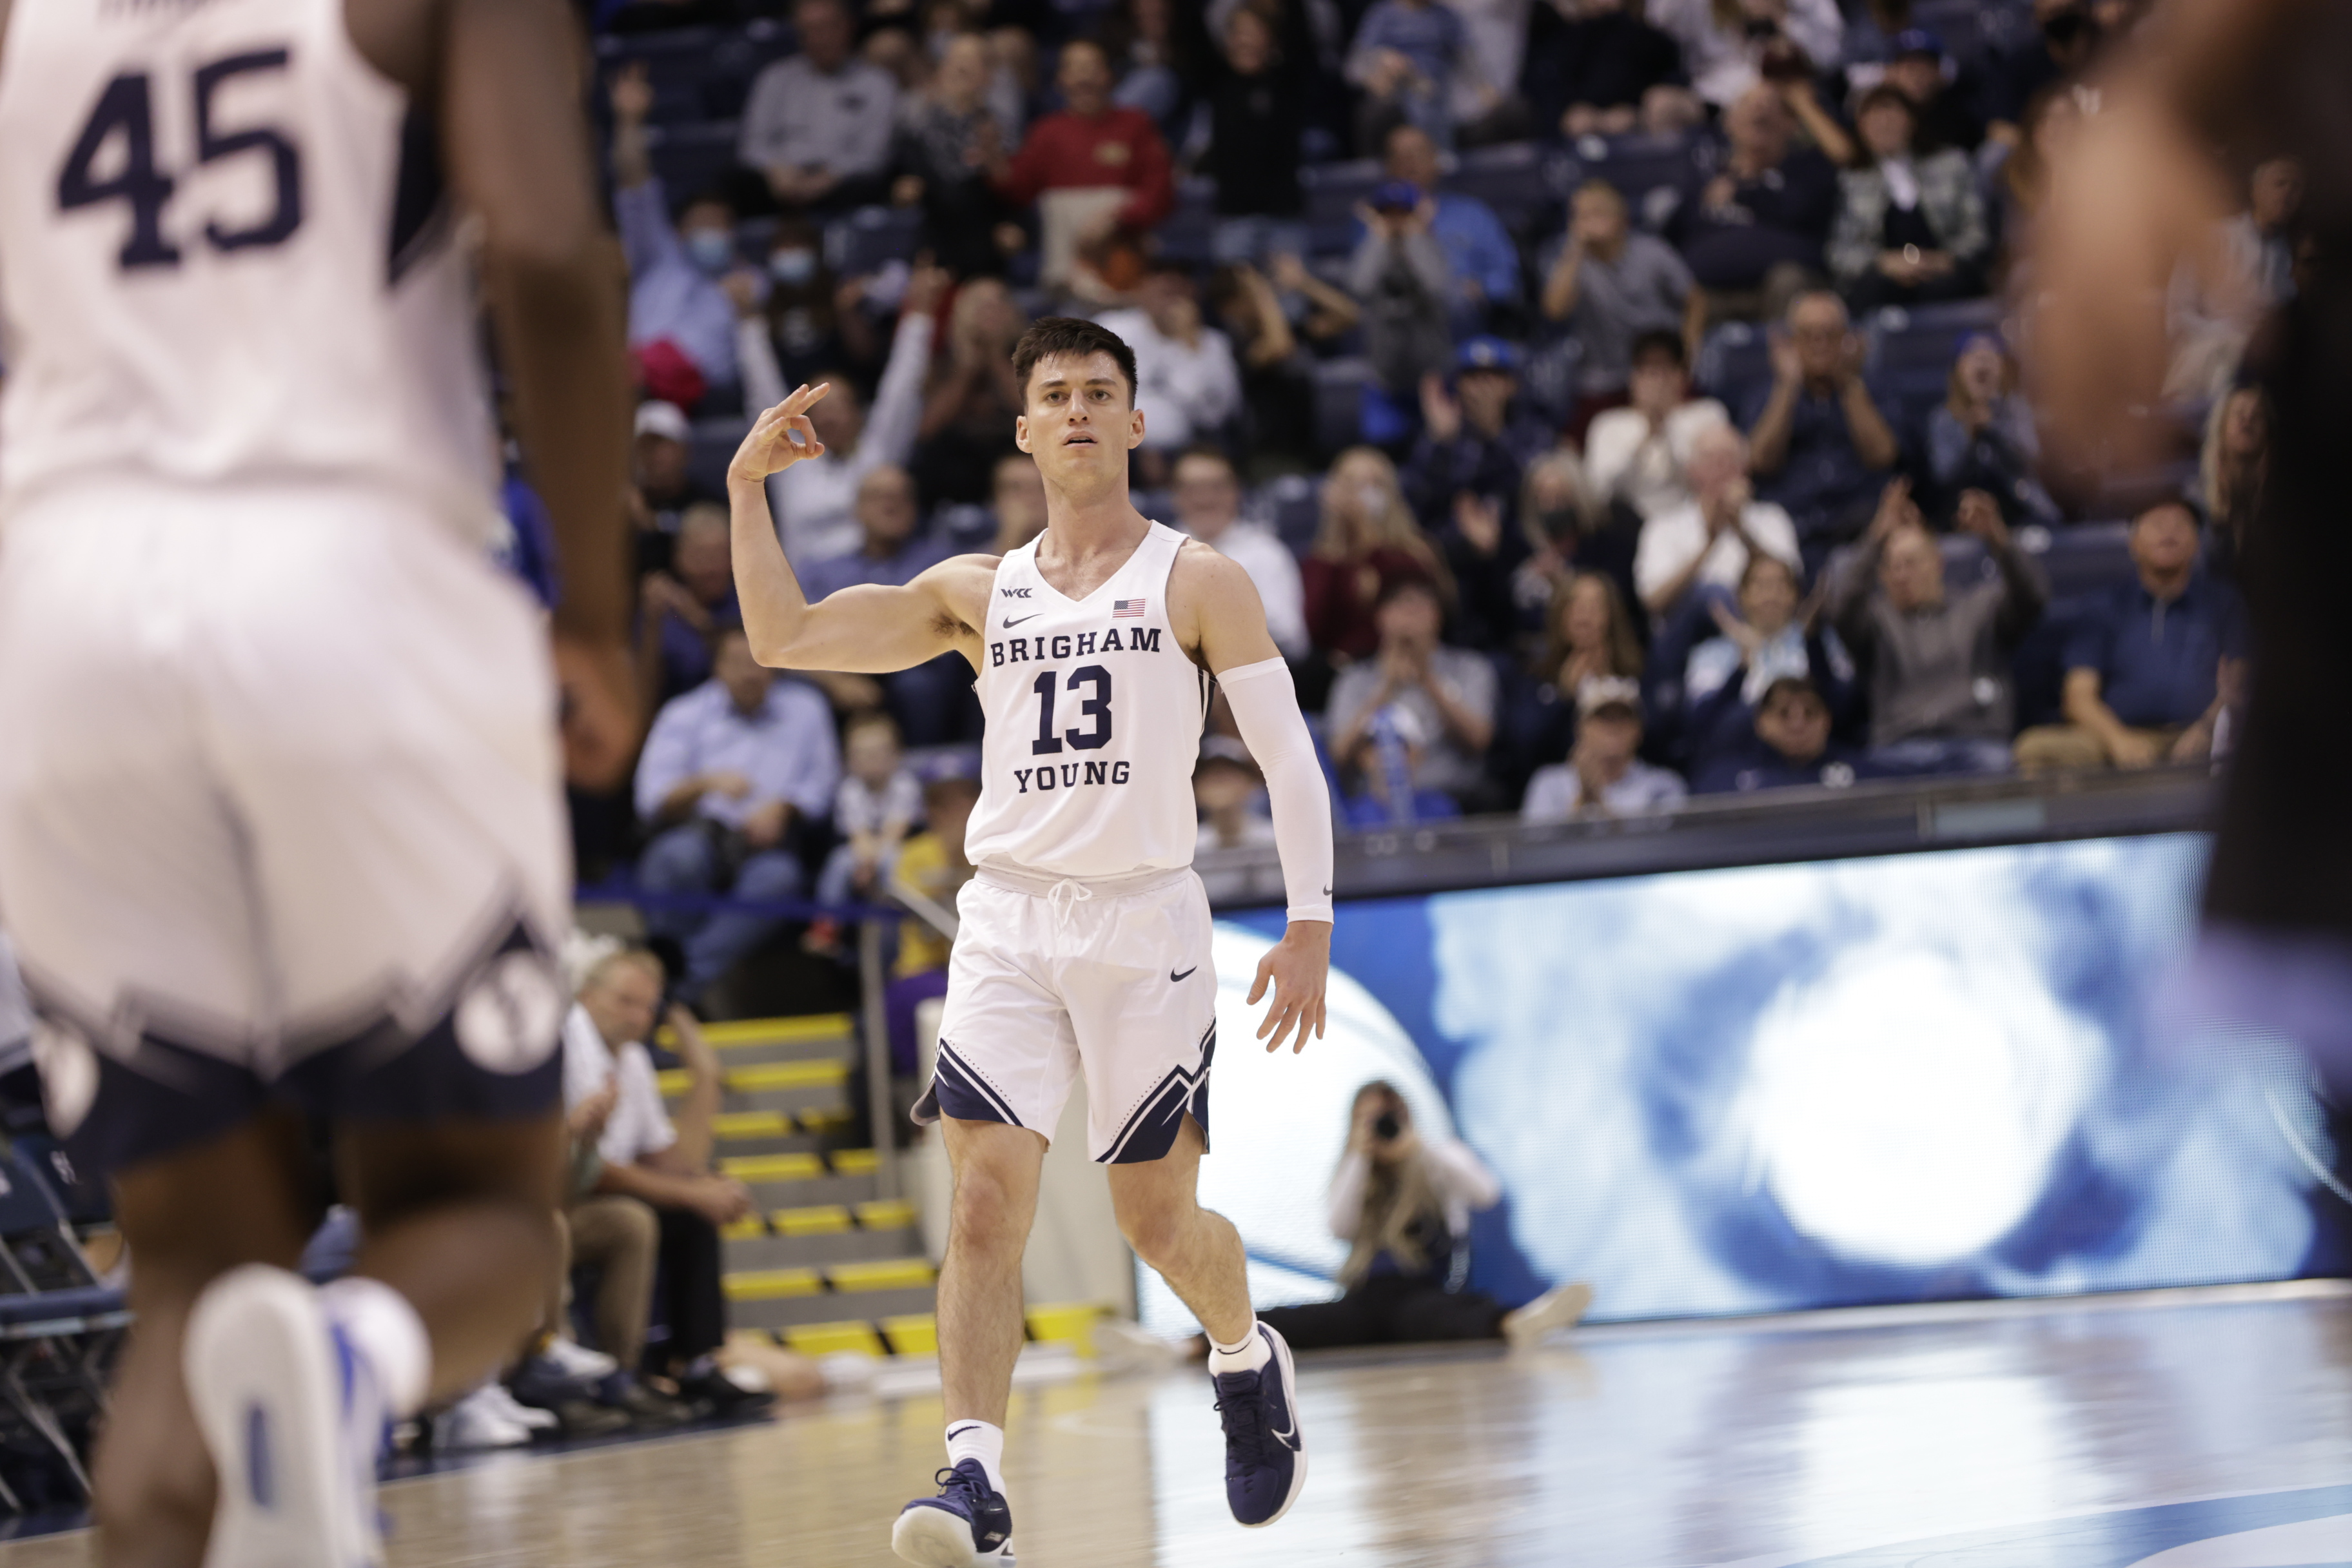 BYU men's basketball guard Alex Barcello celebrates a three point field goal in the Cougars 63-45 victory over Colorado Christian University.